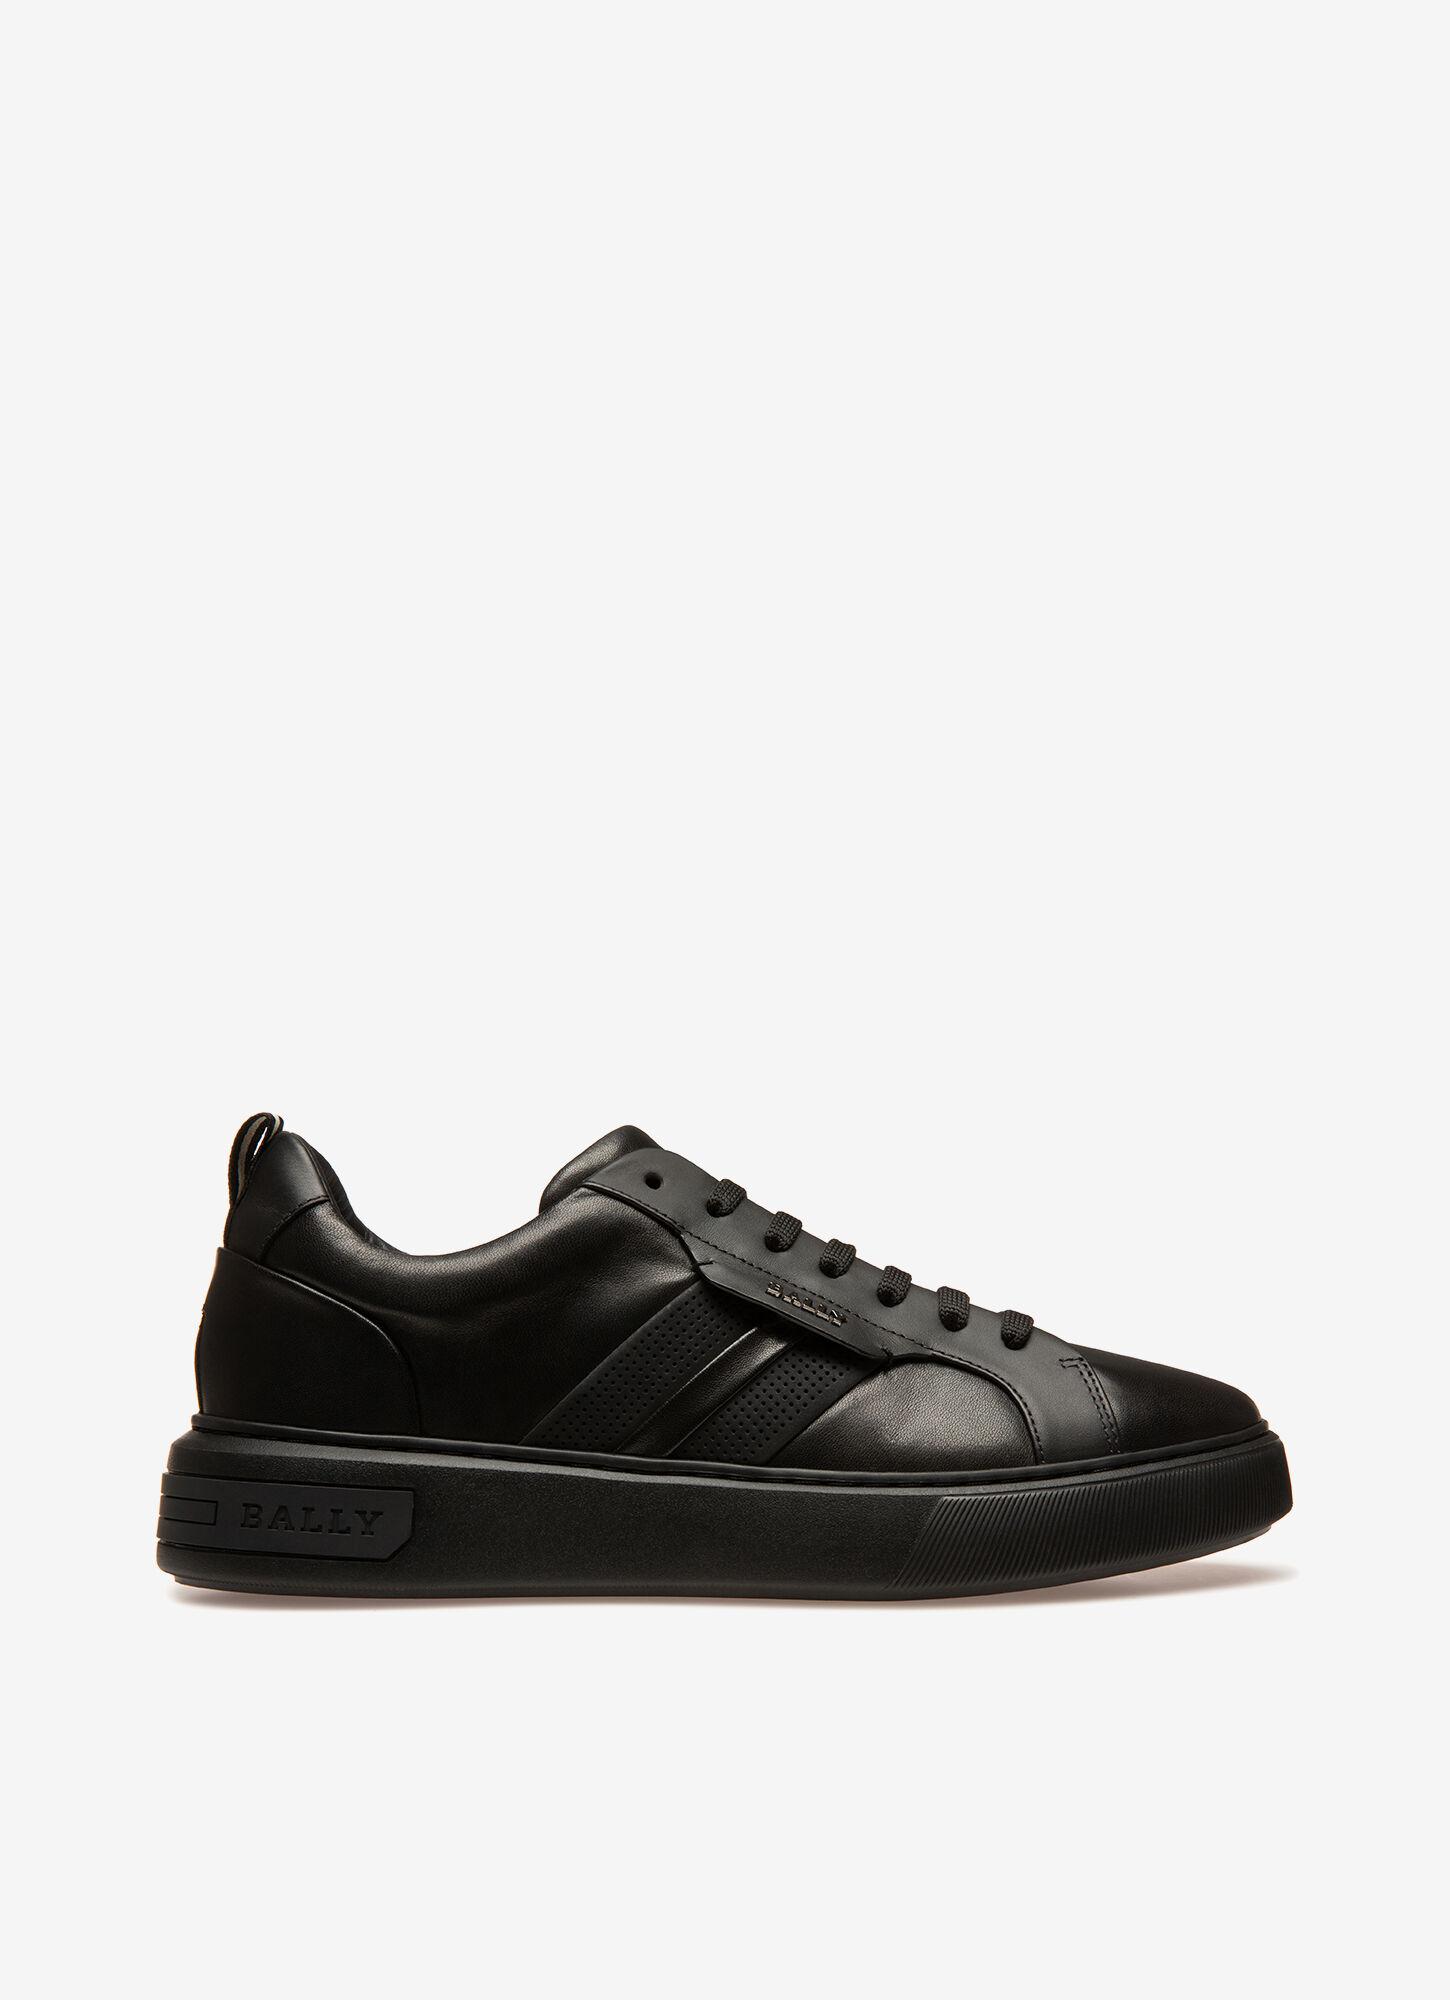 Bally Leather Maxim in Black for Men - Lyst